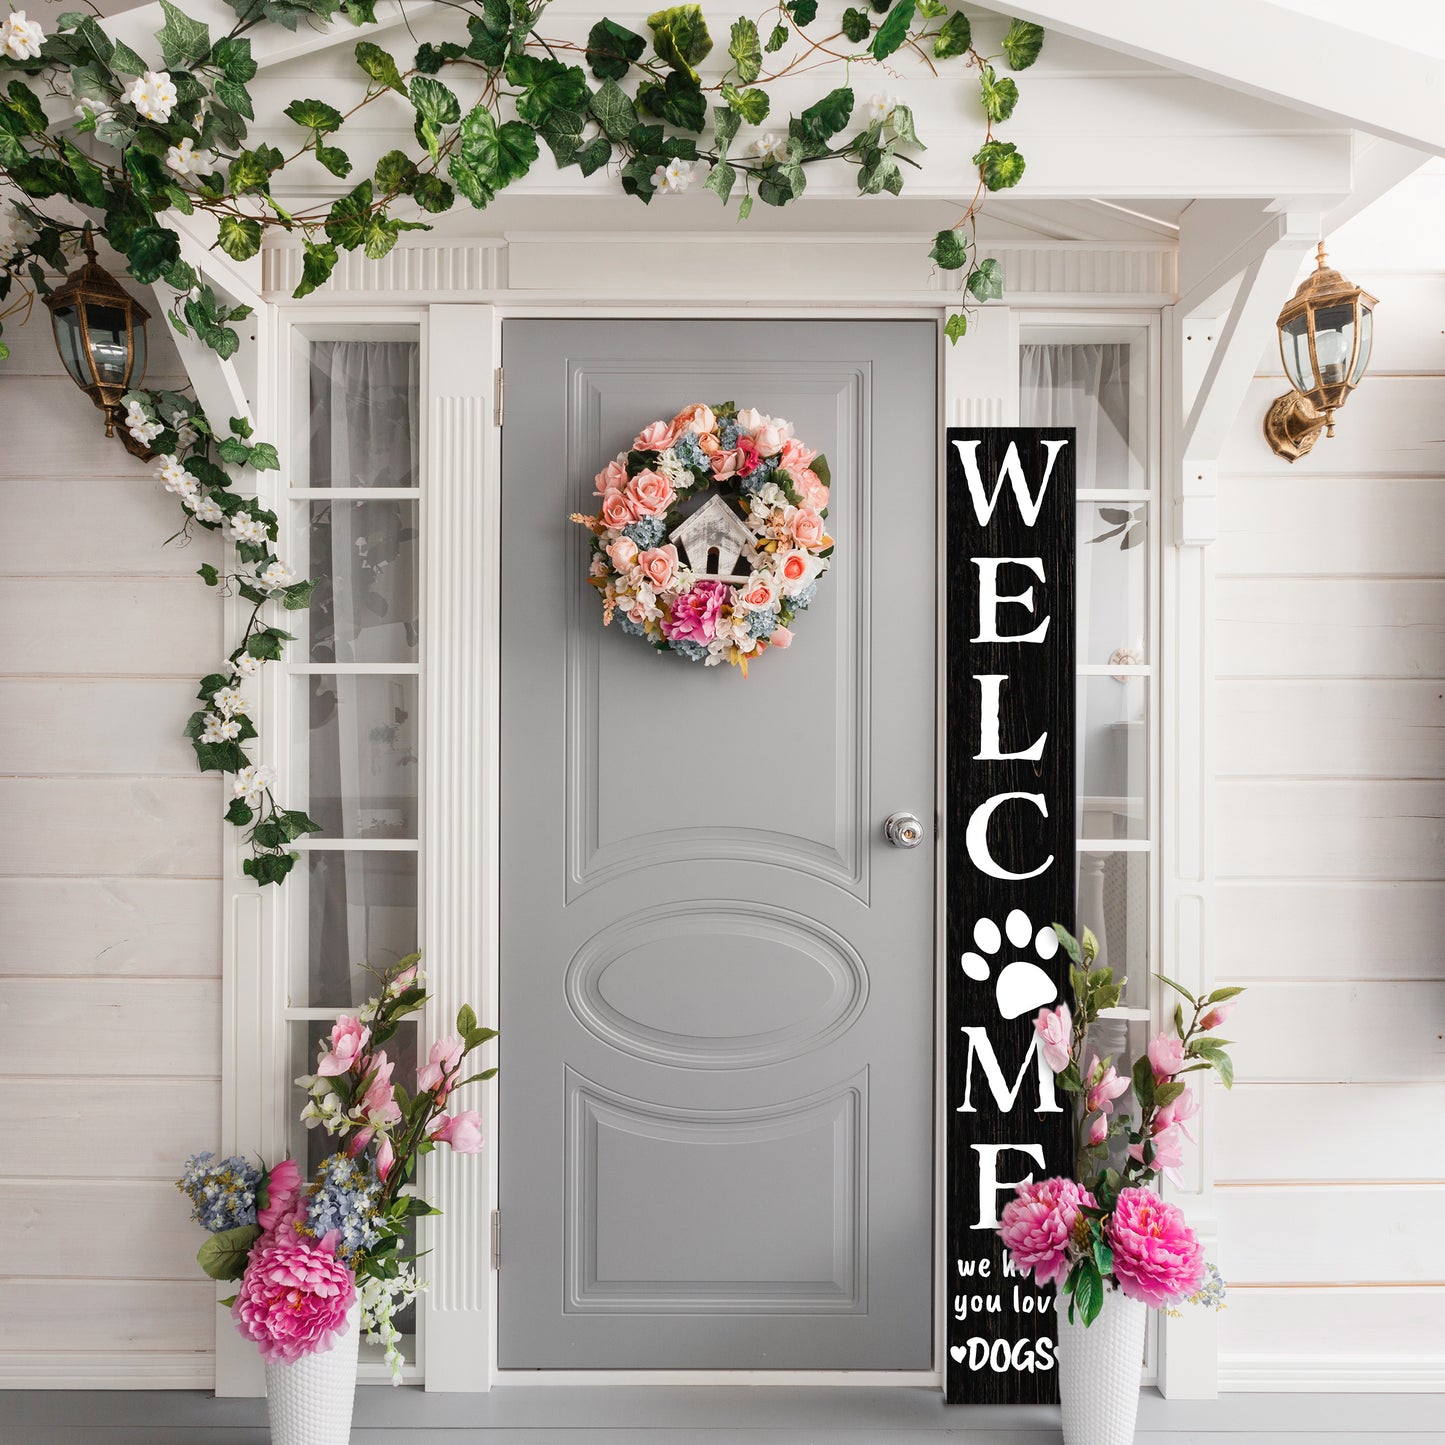 72in 'We Hope You Love Dogs' Black Porch Sign - Dog Lover Welcome Home Sign, Ideal for Dog House Decor, Perfect Everyday Porch Decor"